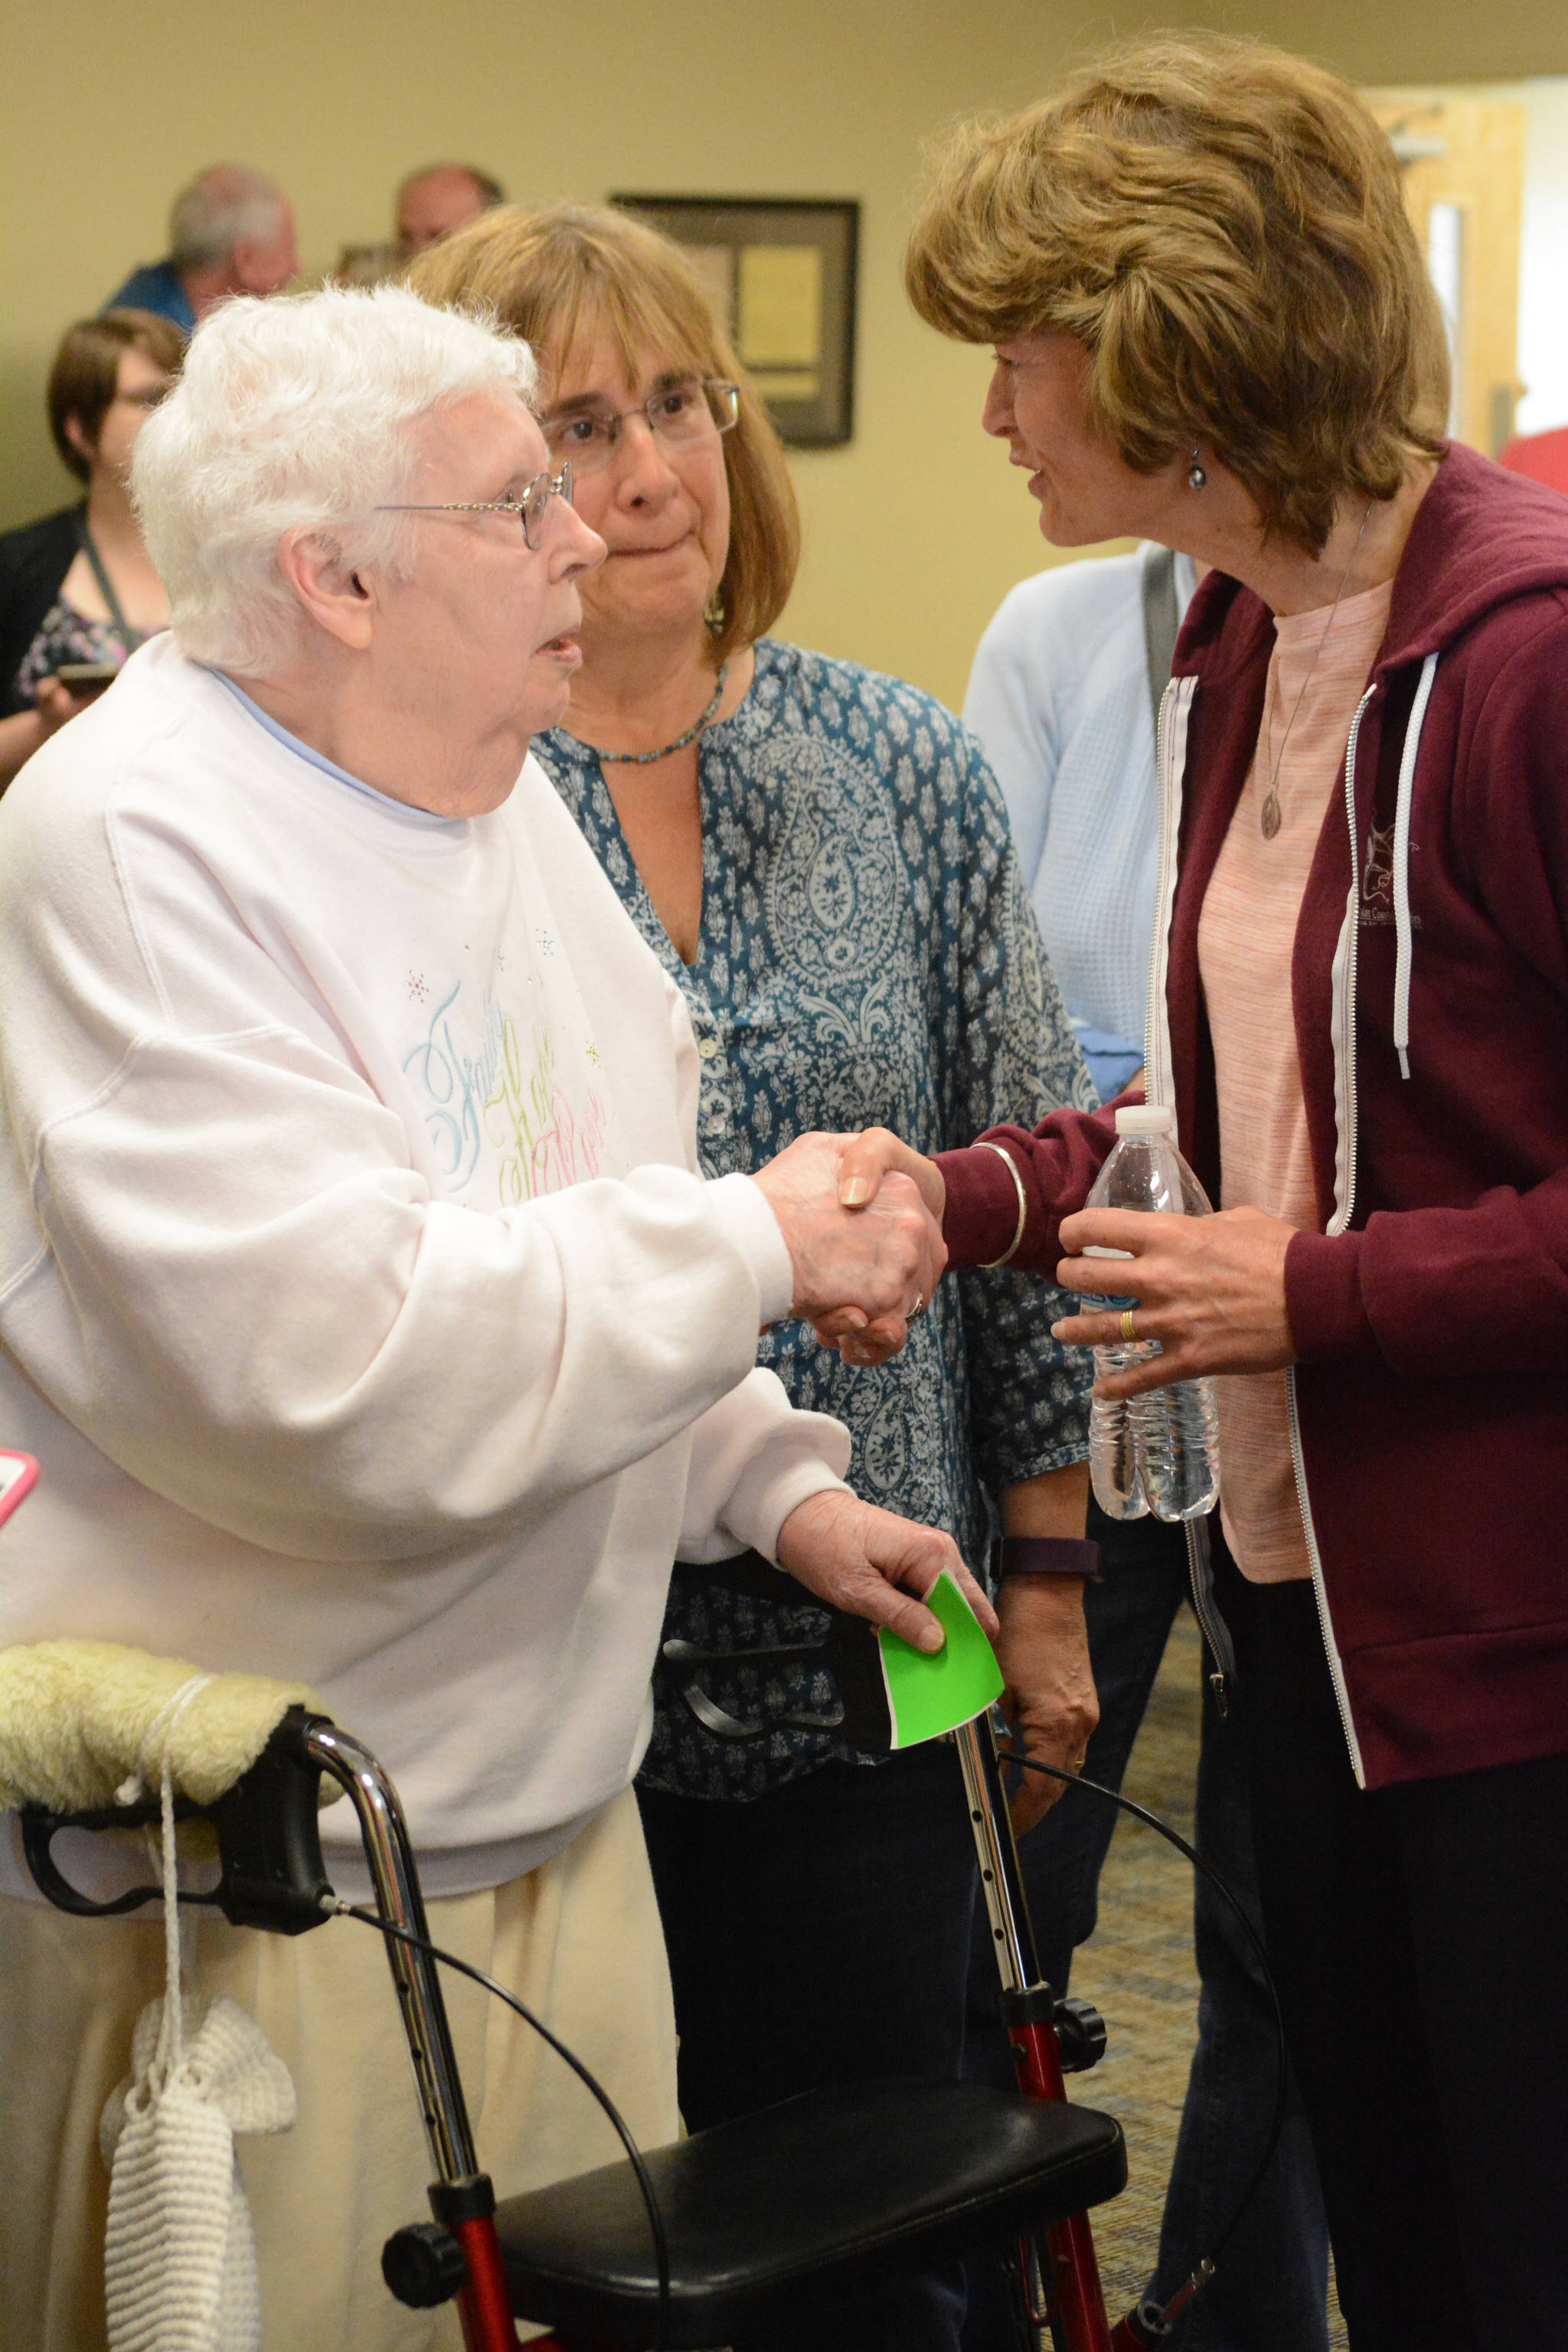 Sen. Lisa Murkowski, R-Alaska, right, visits with retired nurse Mary Raymond, left, as Mary Fries, center, also a nurse, listens. Murkowski spoke at town hall meeting on health care Friday, July 7, 2017, at Homer City Hall. About 150 people packed the Cowles Council Chambers to share their concerns about health care.